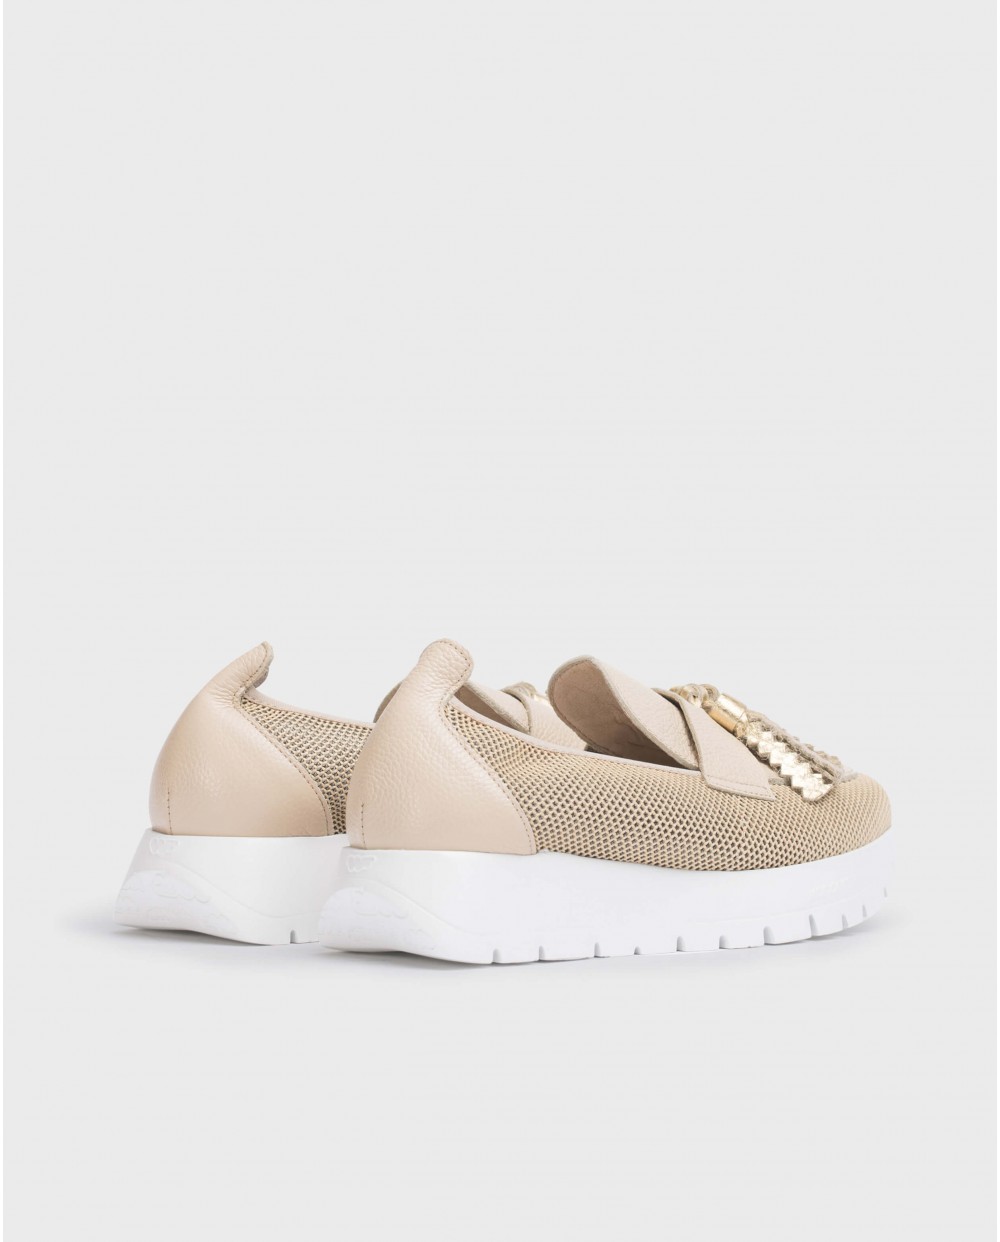 Wonders-Loafers-Beige Materia moccasin